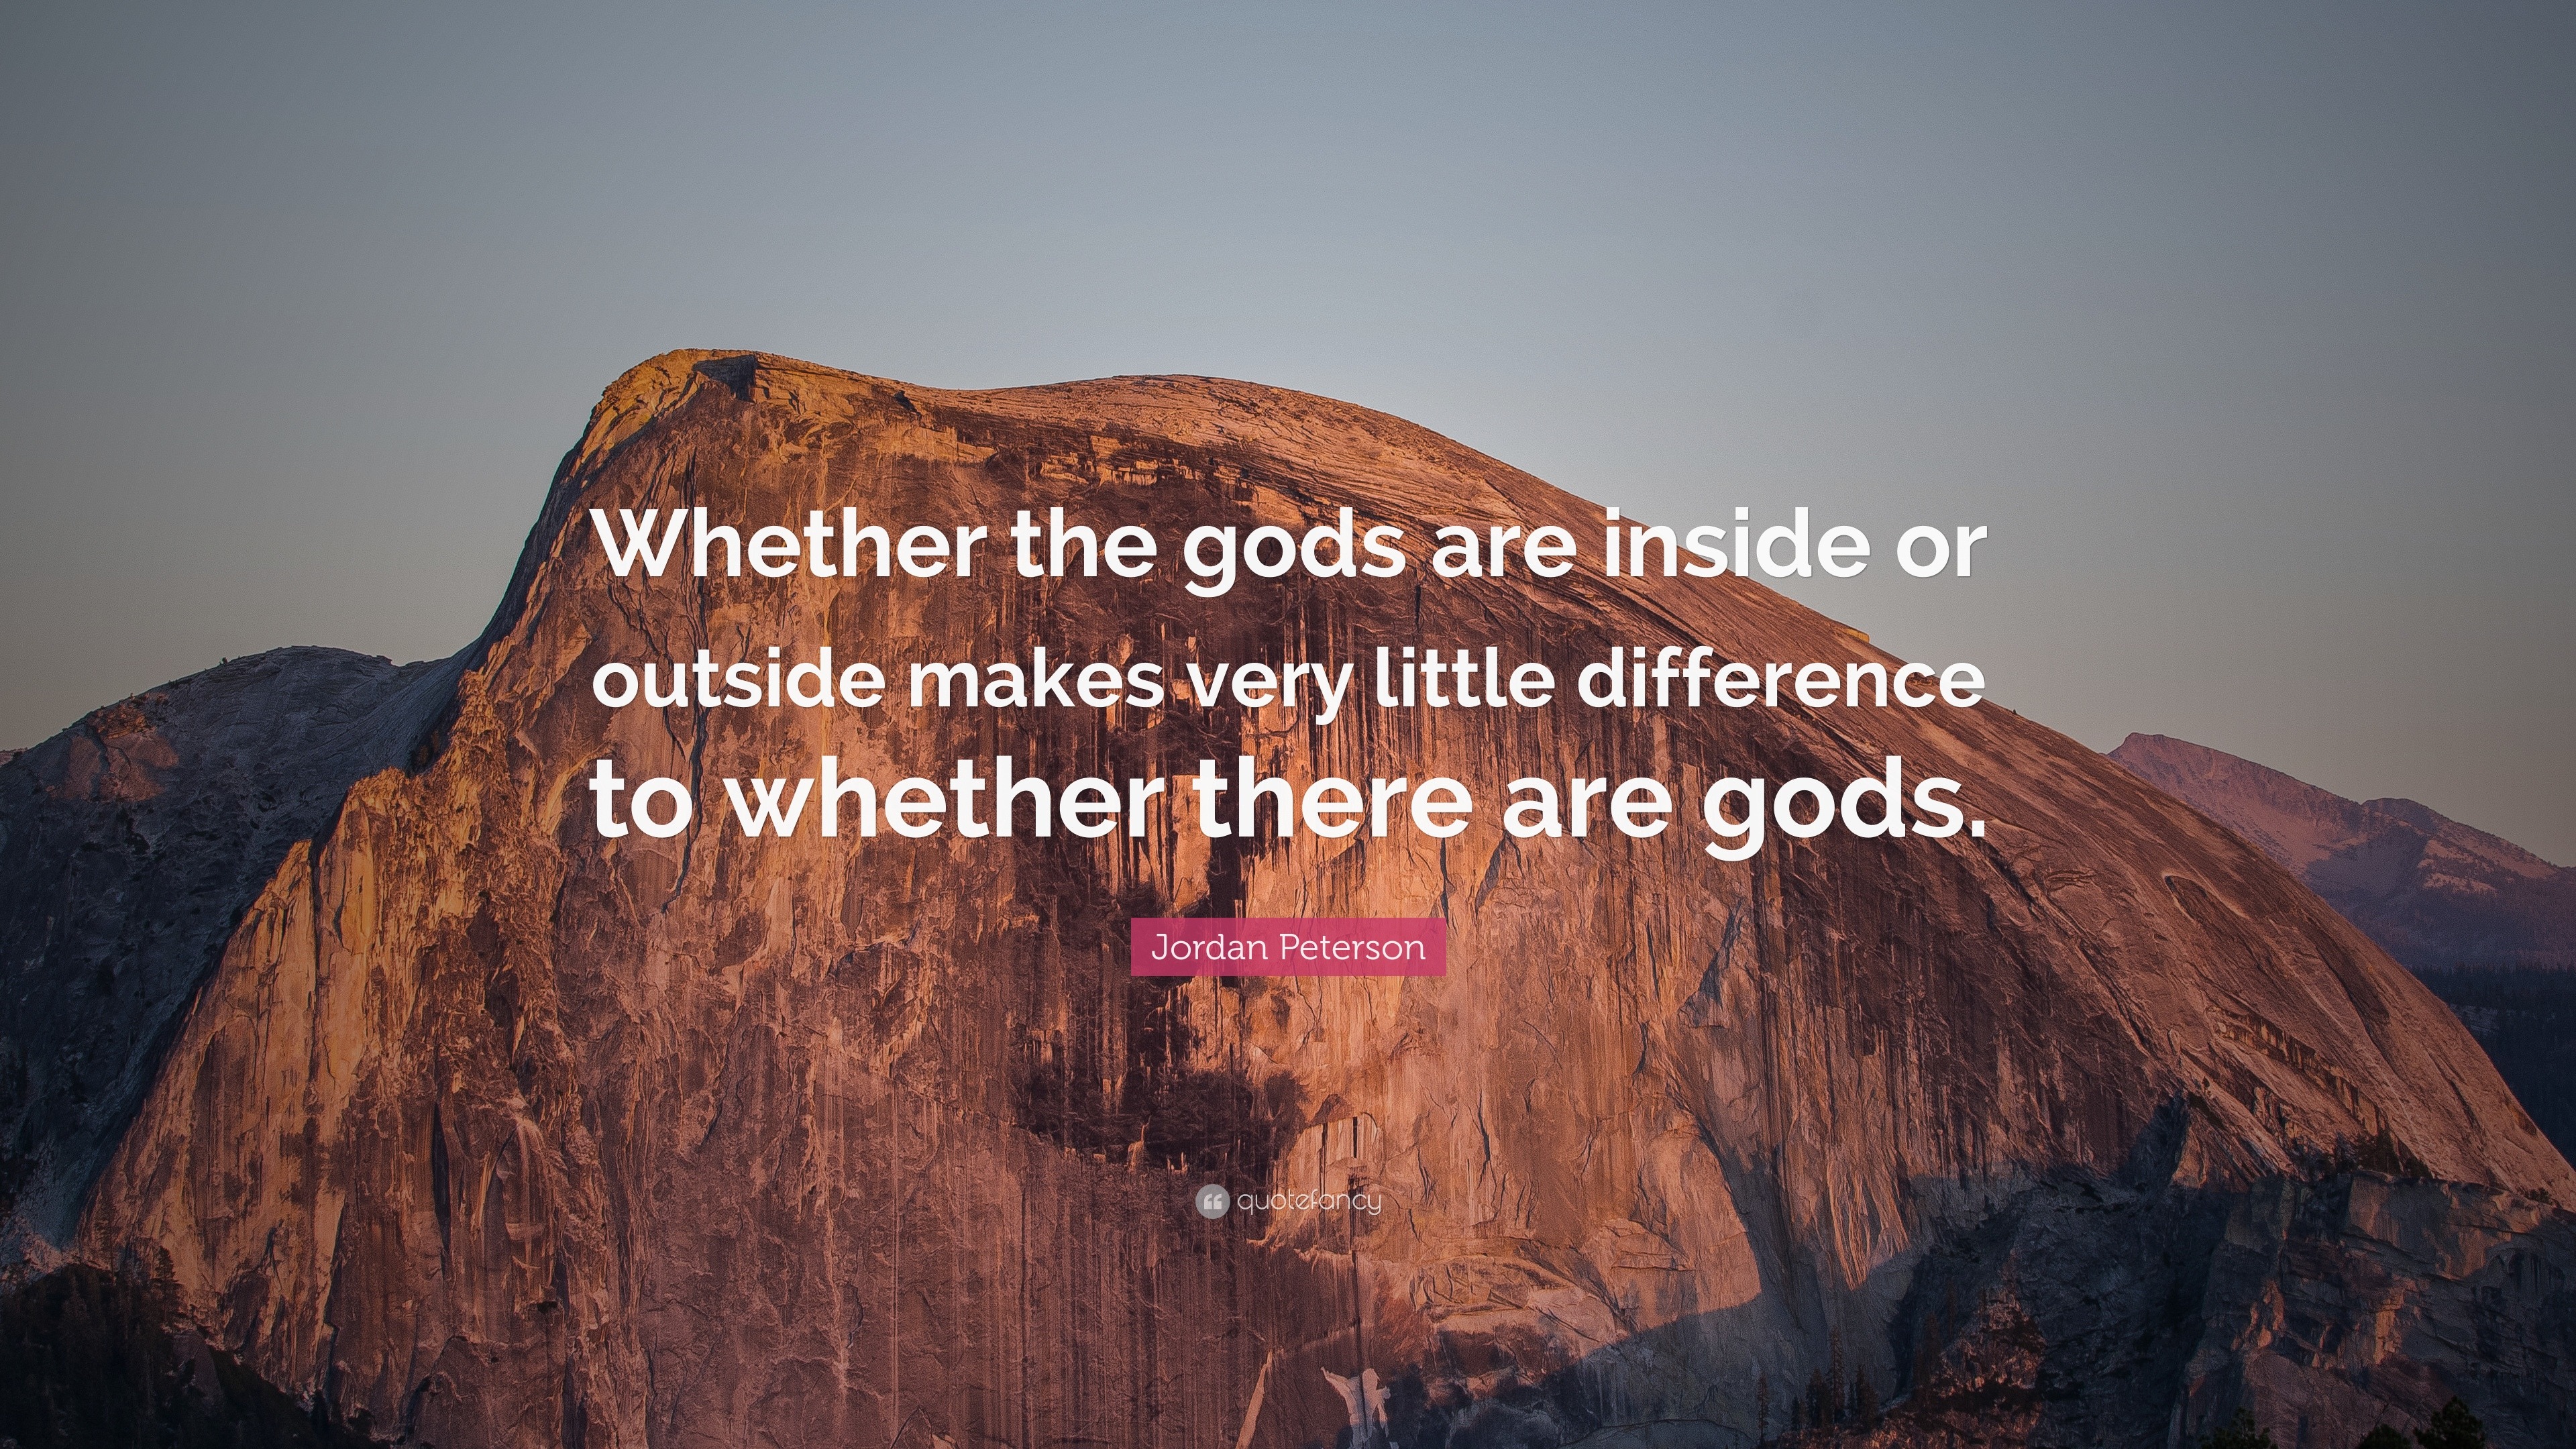 1756676 Jordan Peterson Quote Whether the gods are inside or outside makes